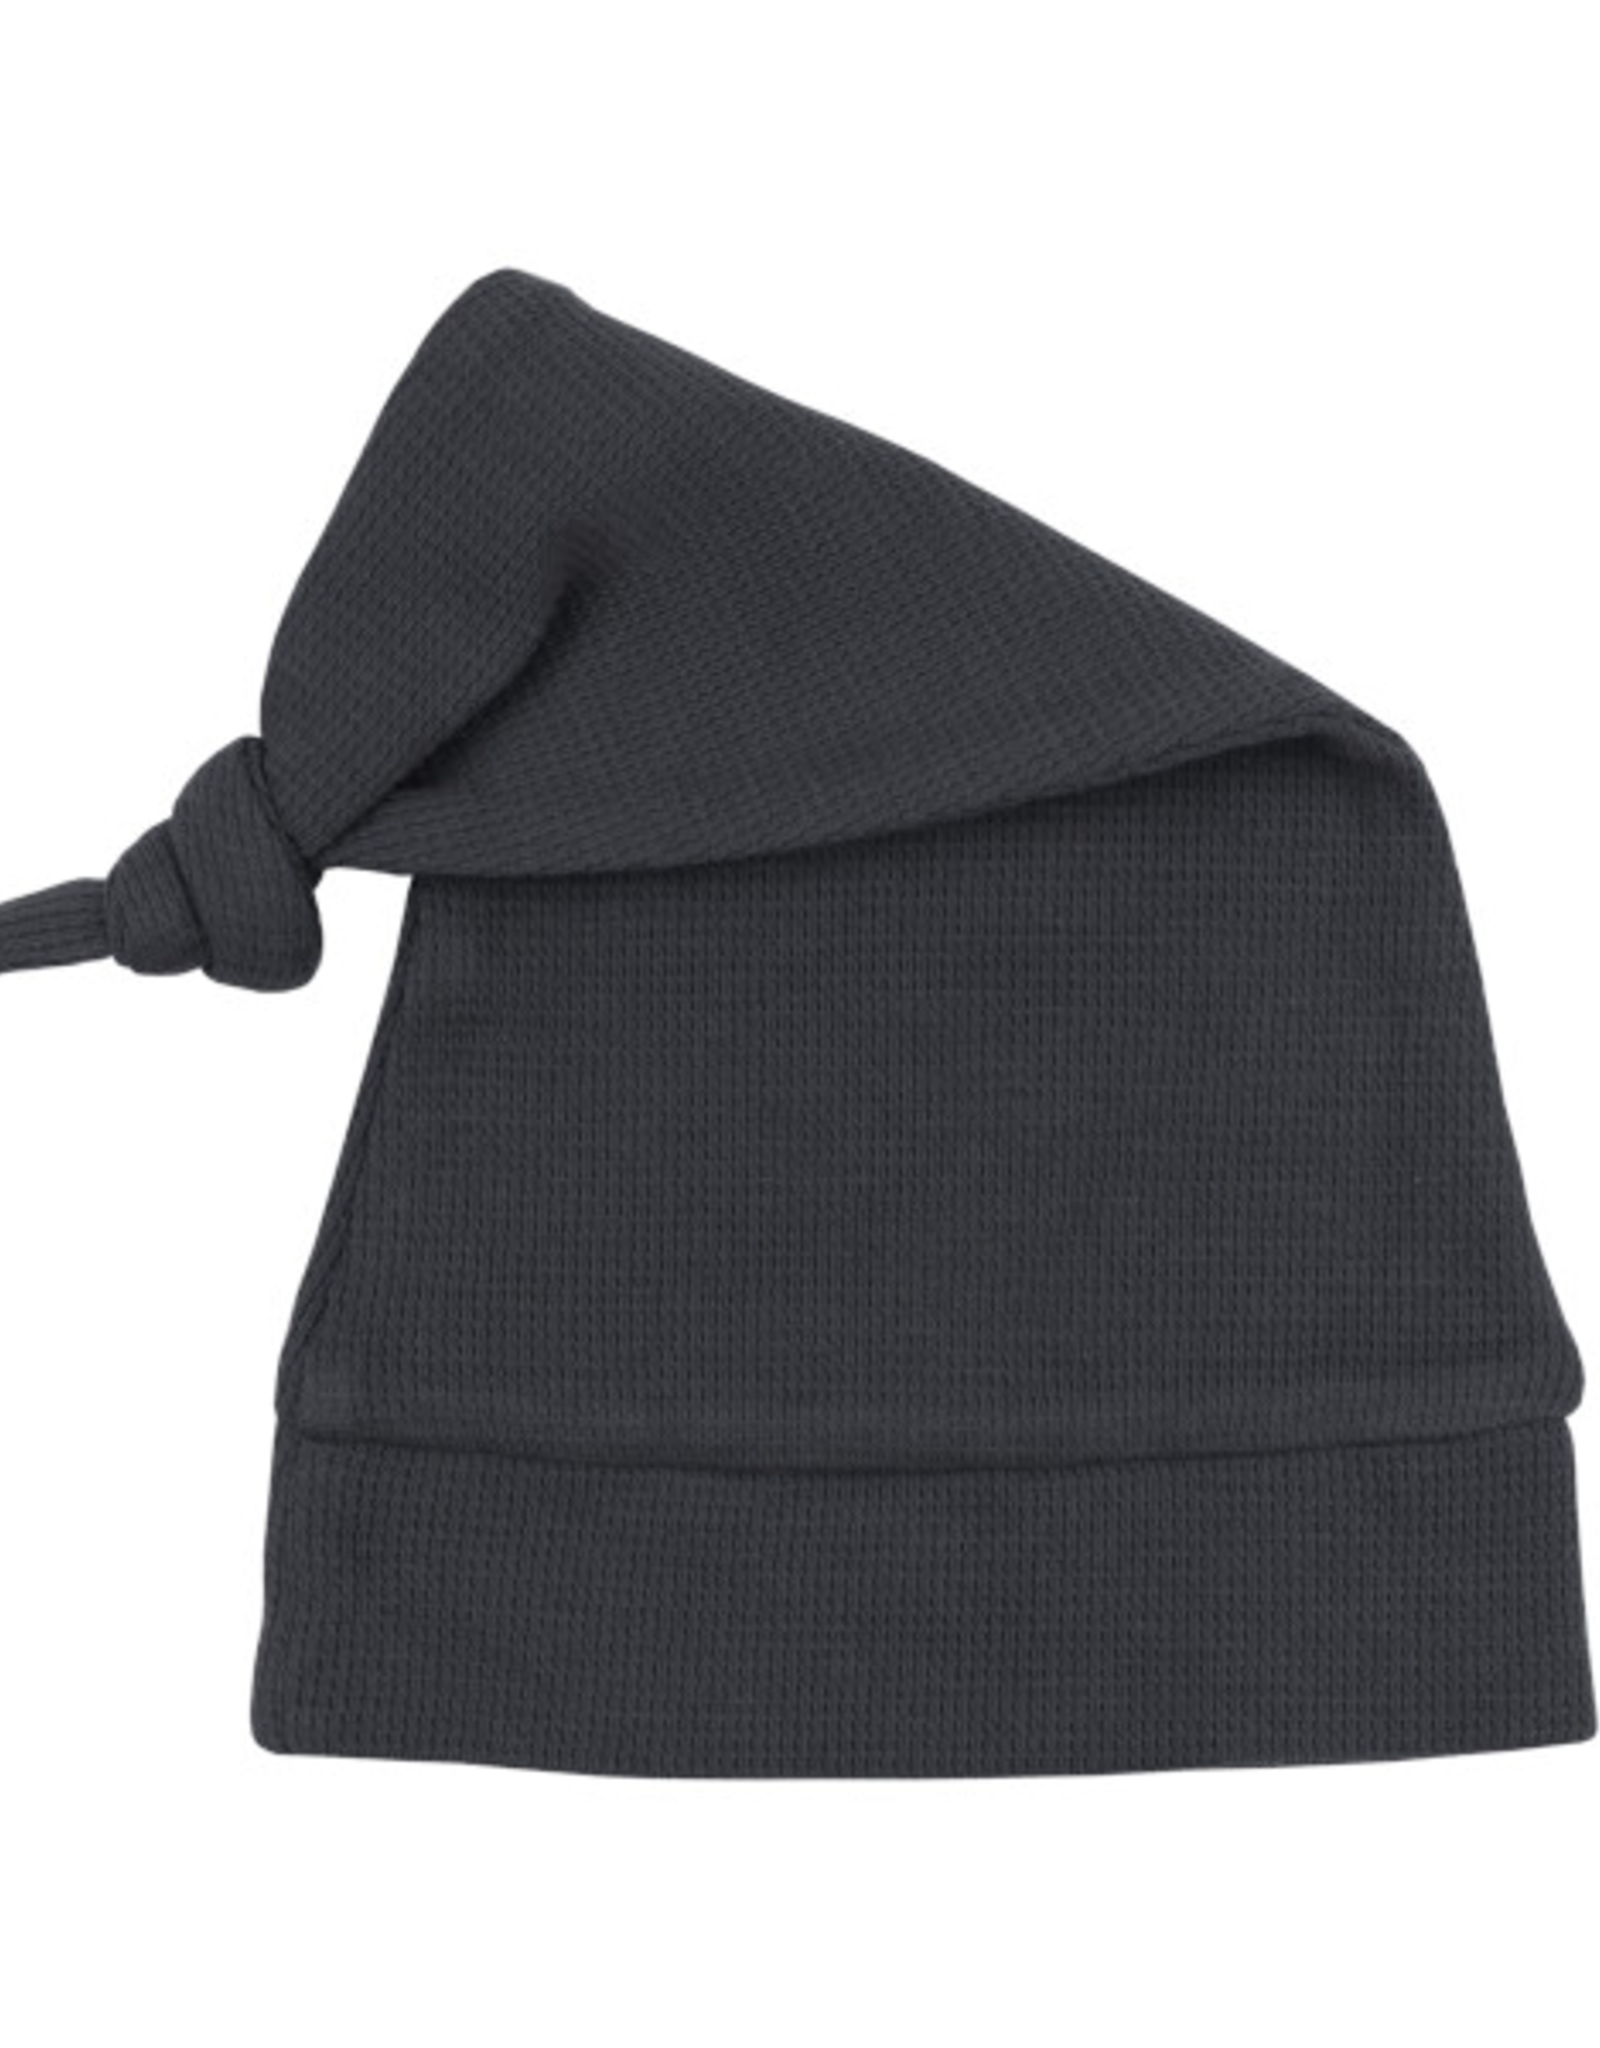 L'oved Baby Thermal Knot Cap Coal - 12-24m